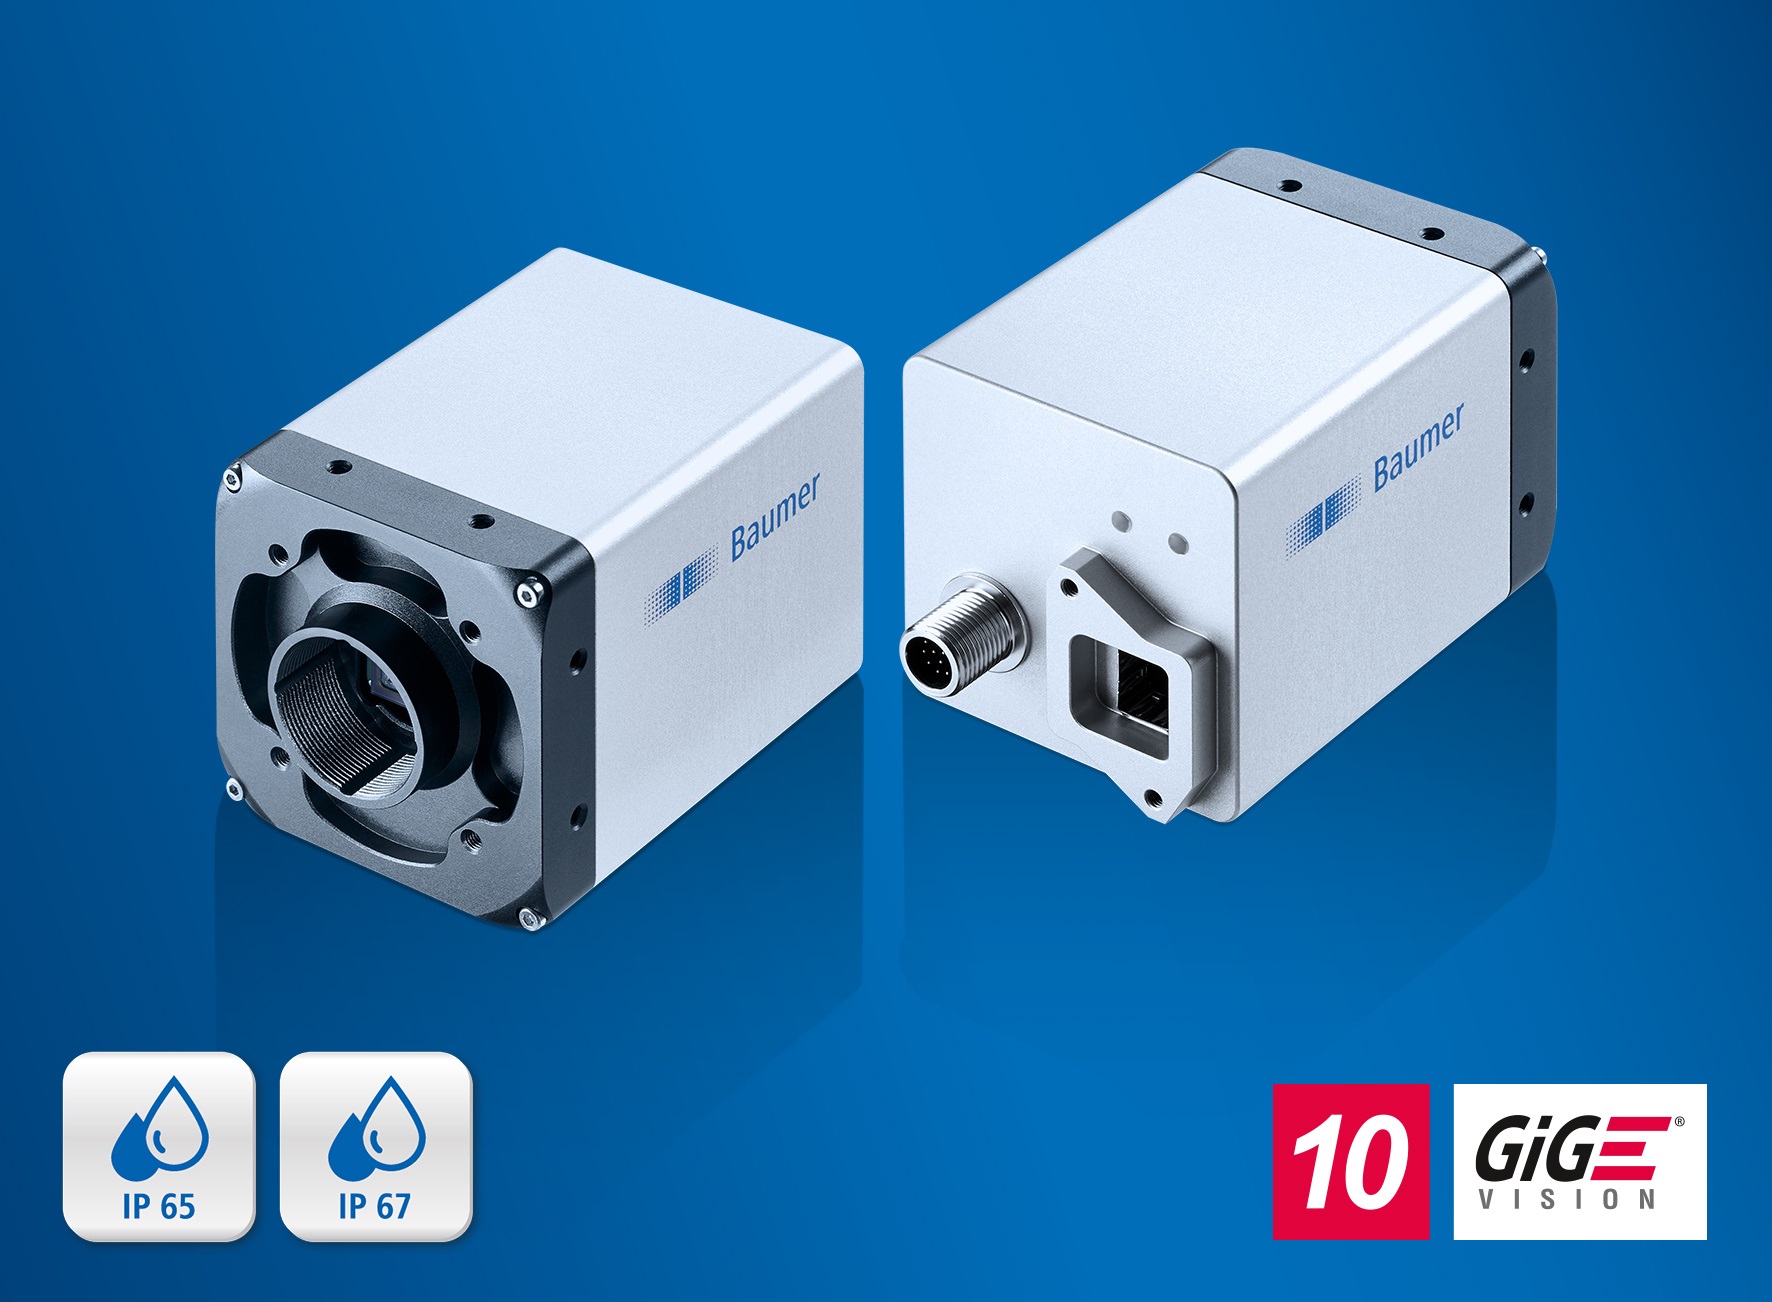 The new LX cameras with a 10 GigE Vision compliant fiber optics interface